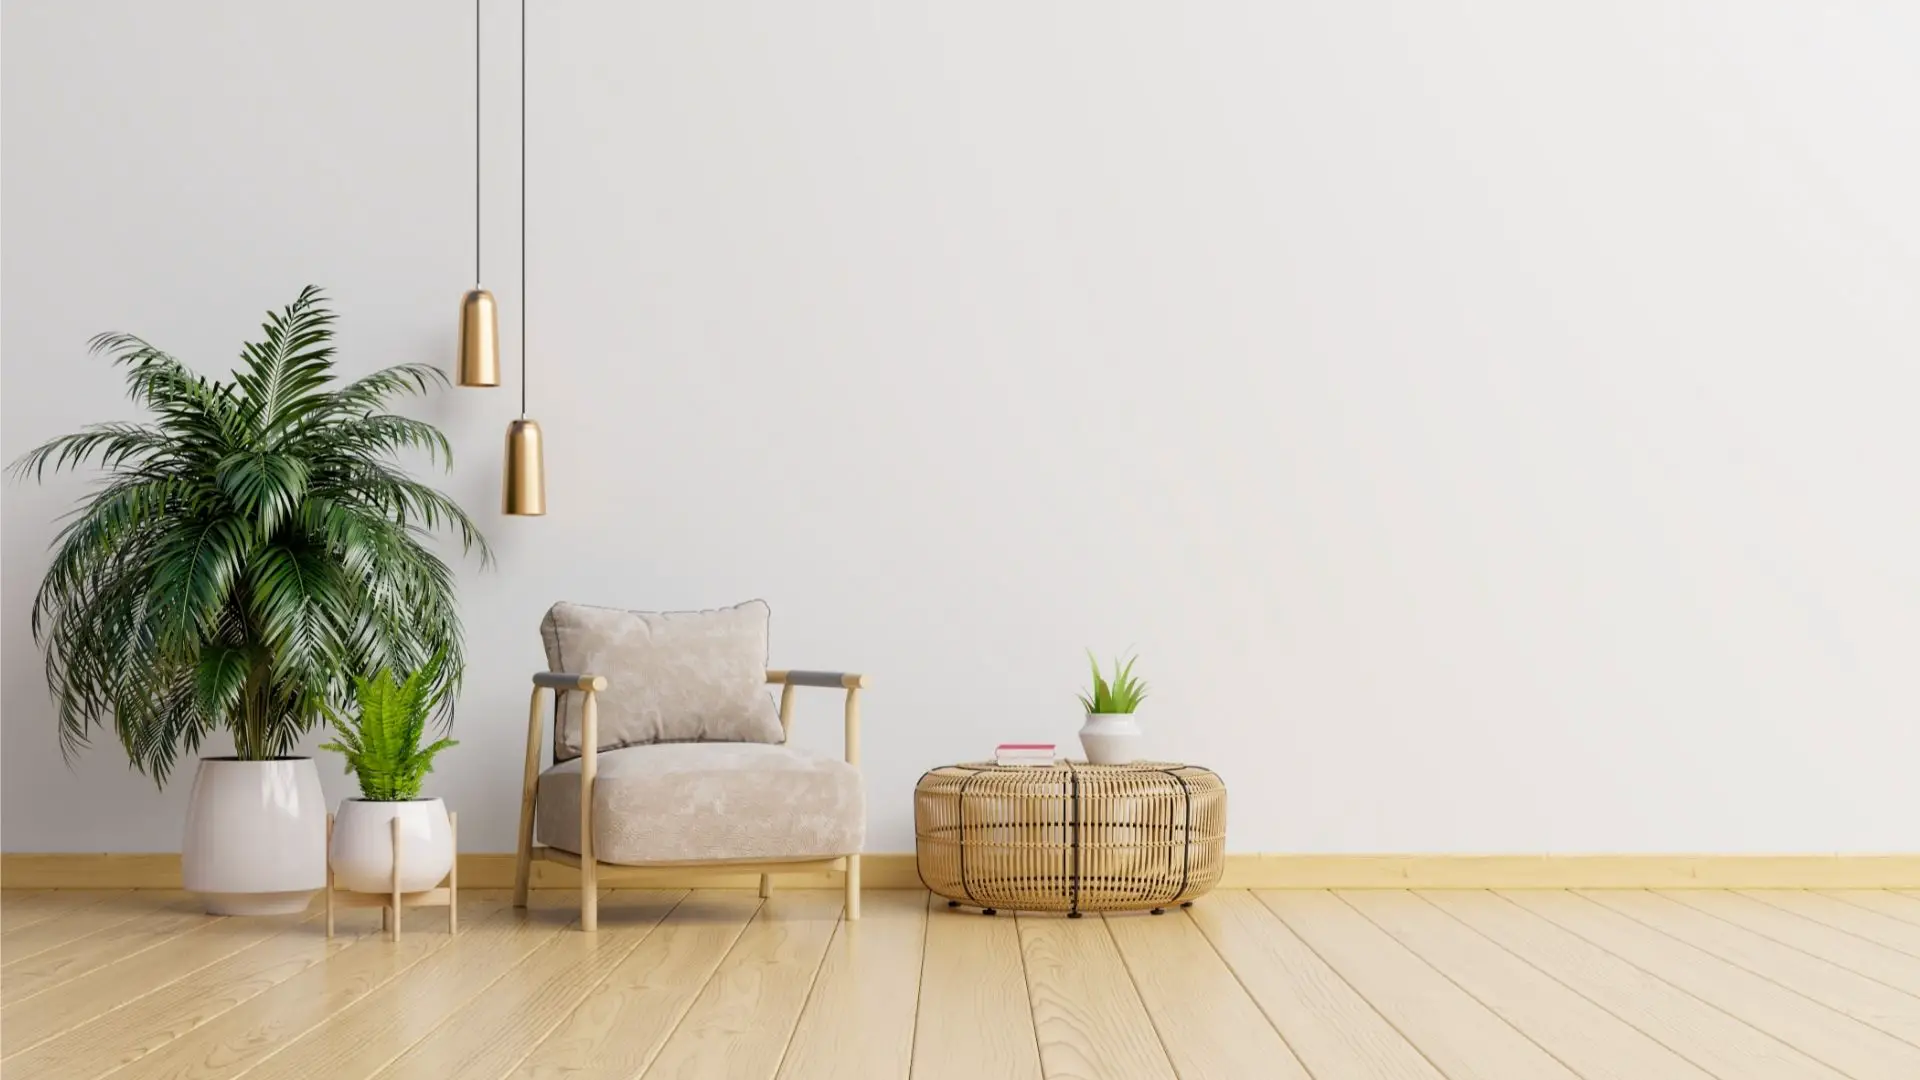 Bring minimalism in your home—here are the rules to follow!